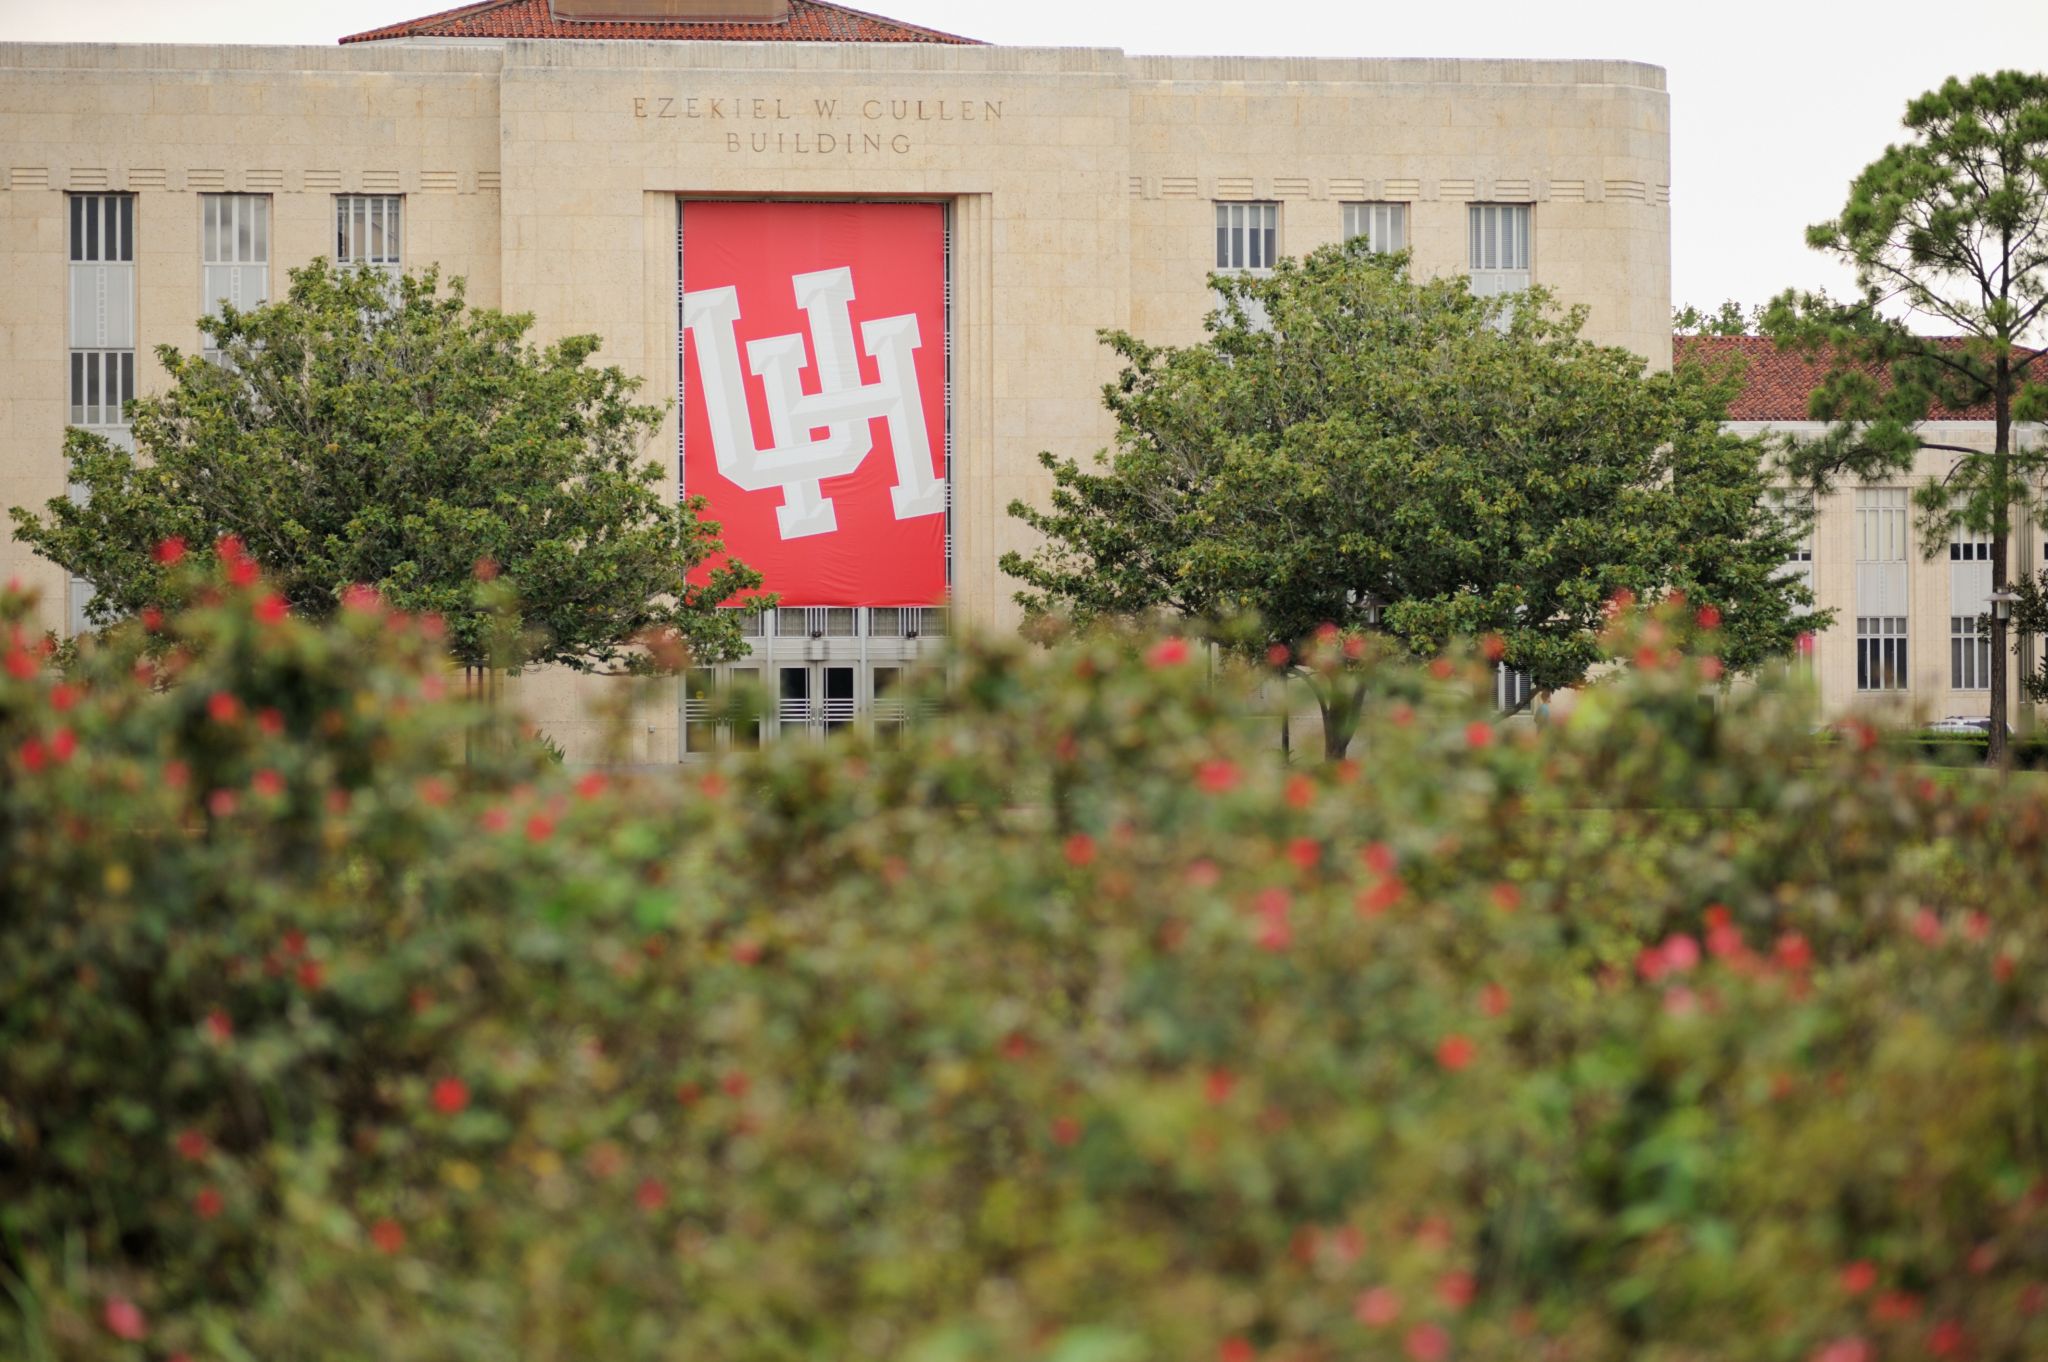 University of Houston ranked No. 2 among the nation's top underrated